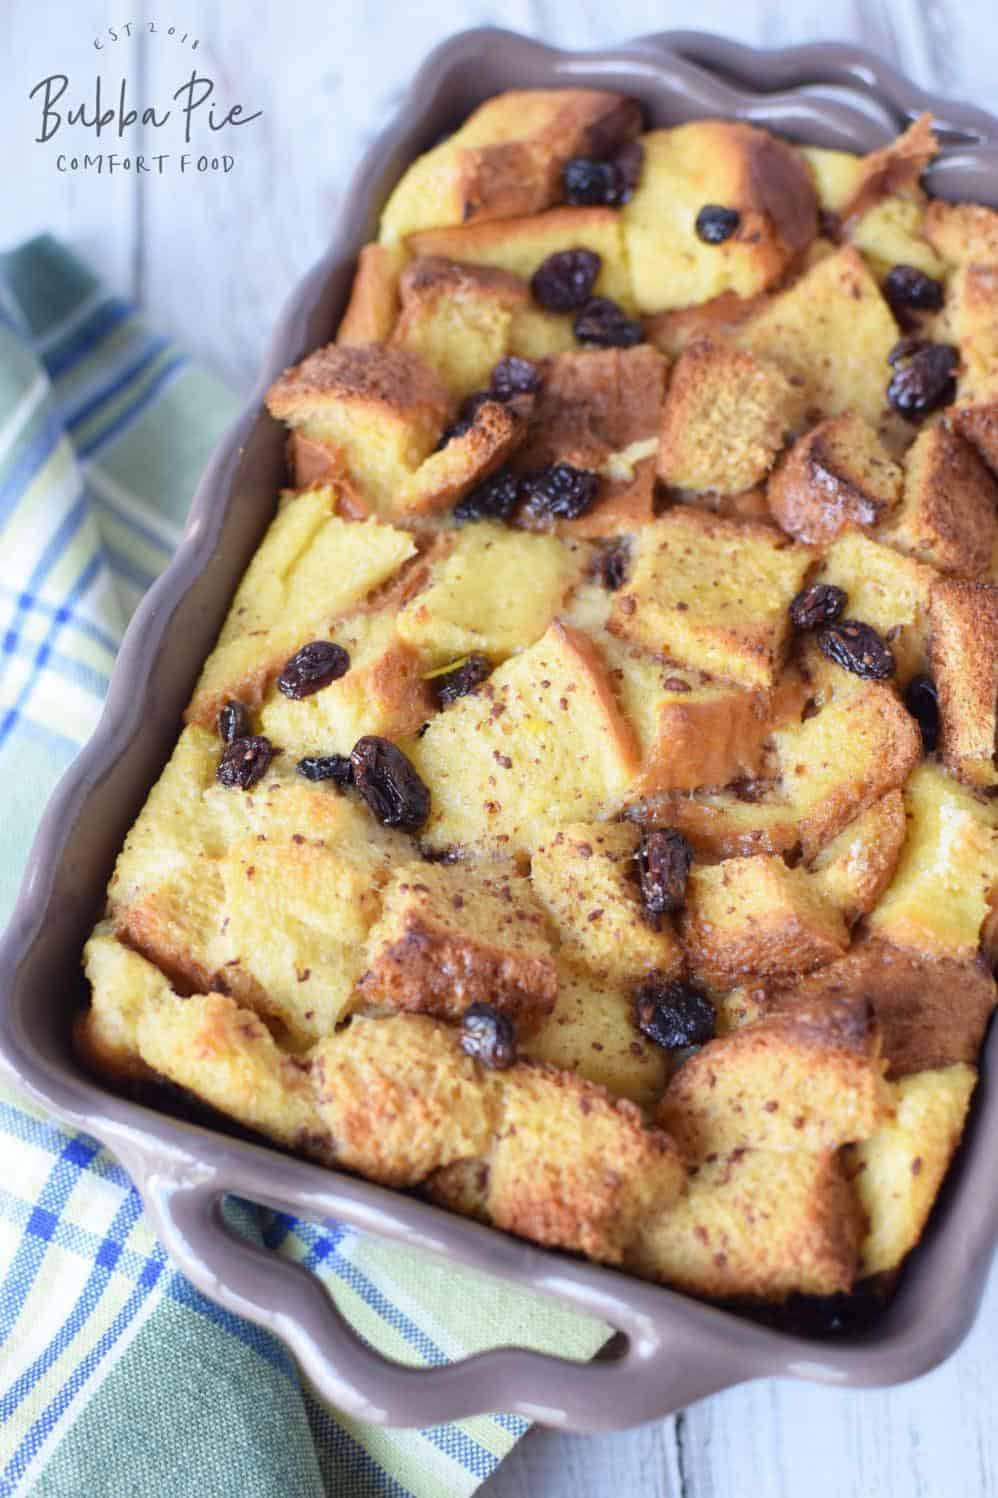  Bread pudding that will make your heart sing!